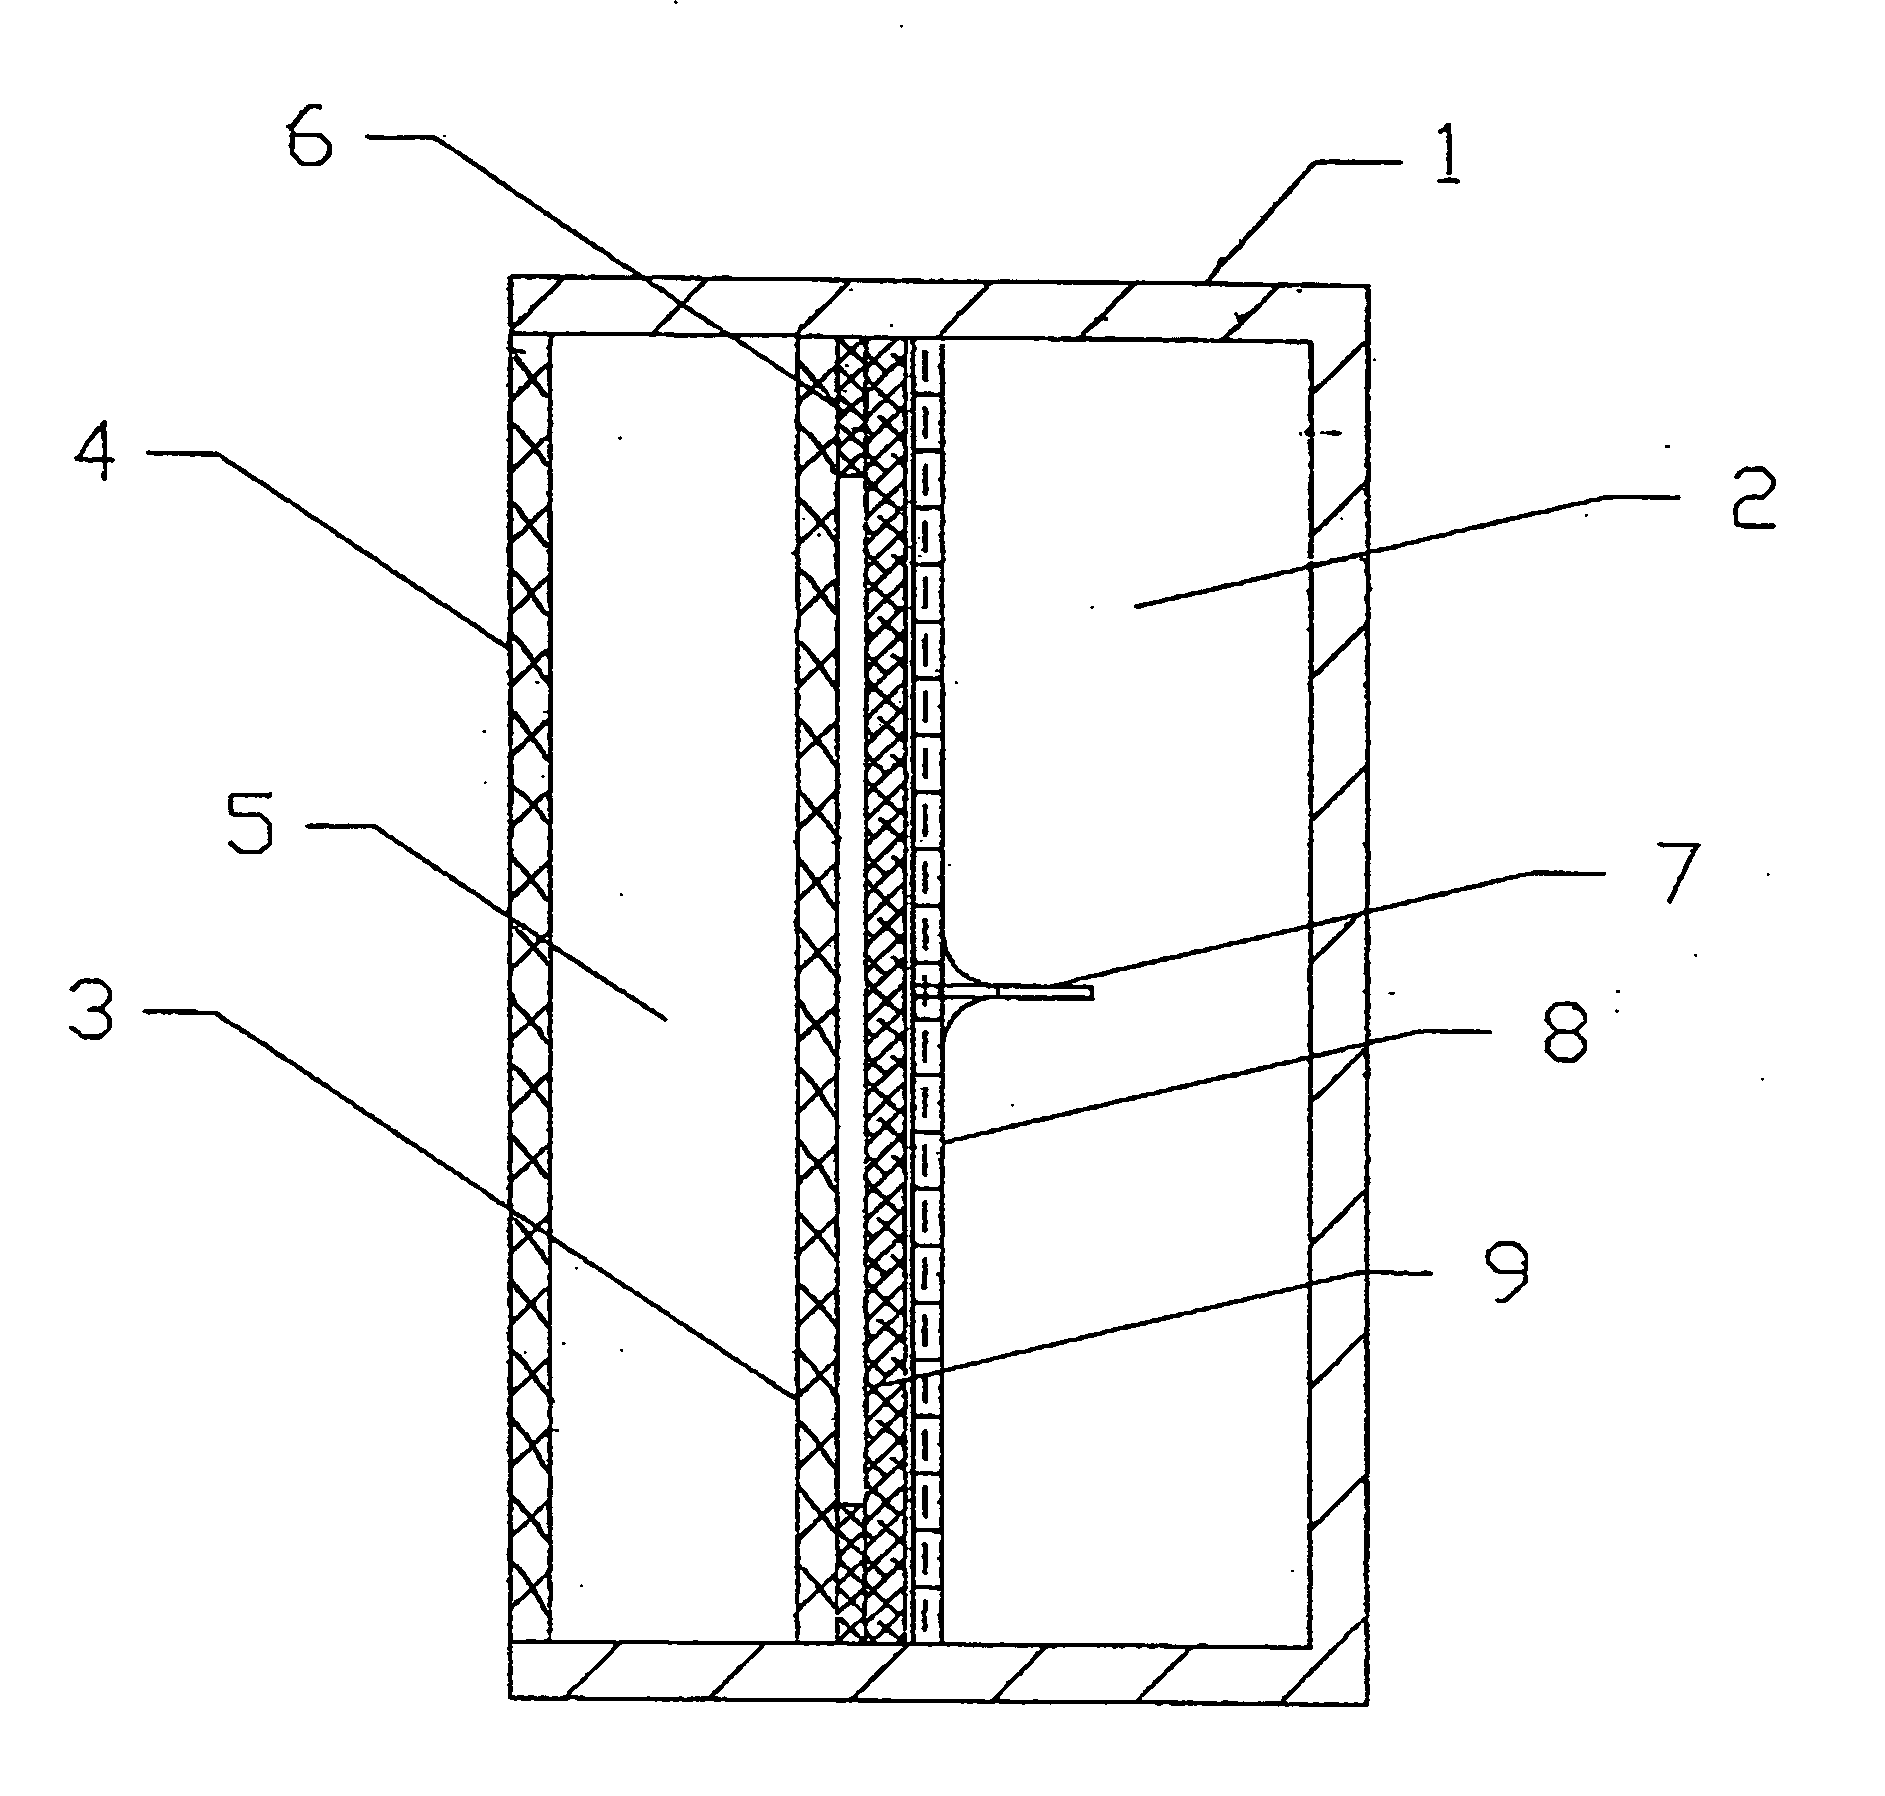 Direct liquid fuel cell and method of peventing fuel decomposition in a direct liquid fuel cell